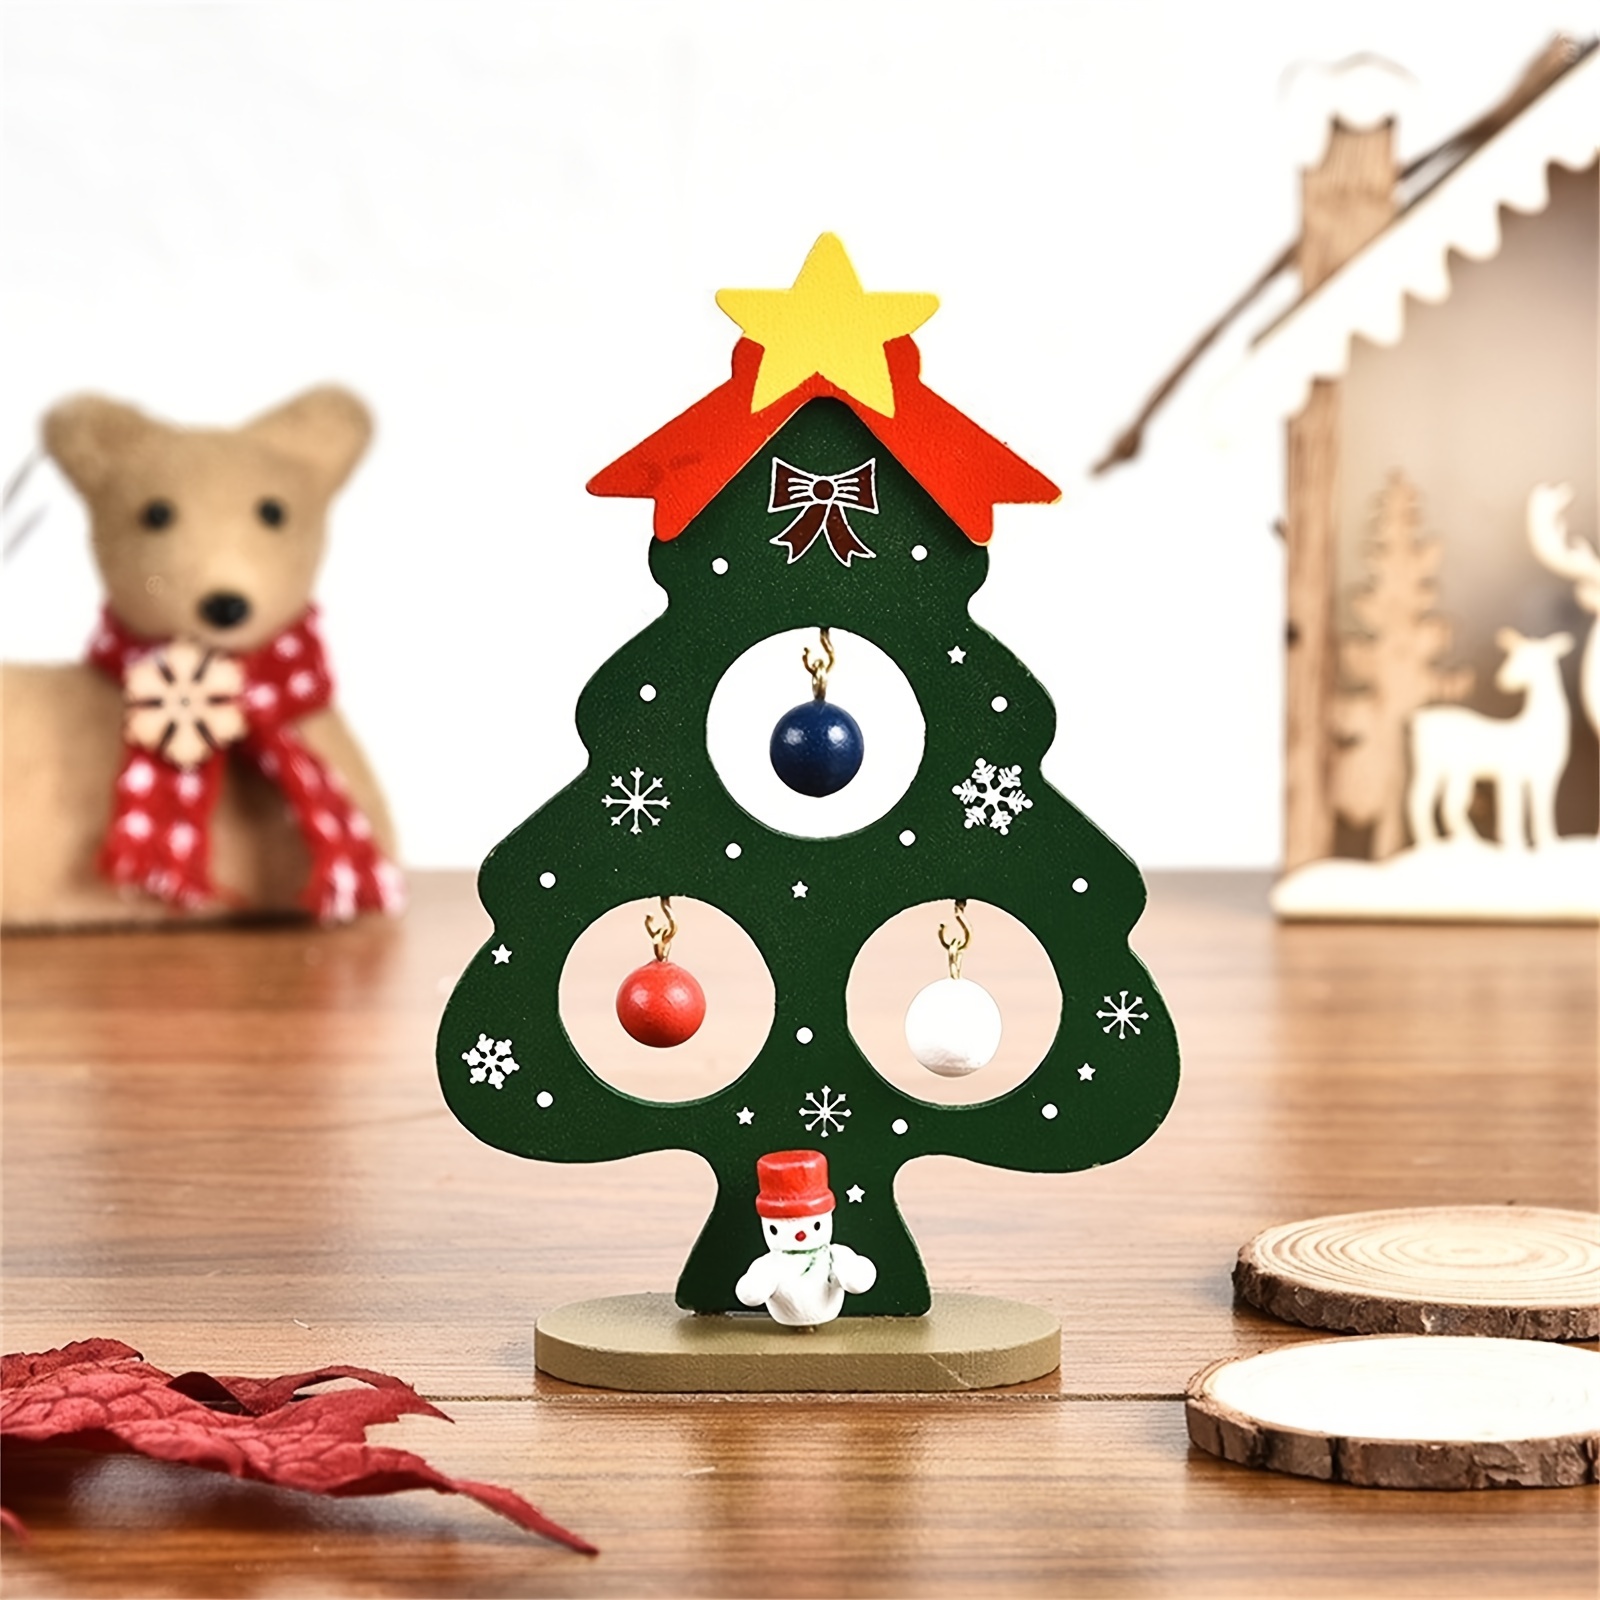 48 Pcs Christmas Ornaments Wooden Mini Christmas Ornaments Assorted With  Christmas Characters For Christmas Tree Decoration Holiday Party